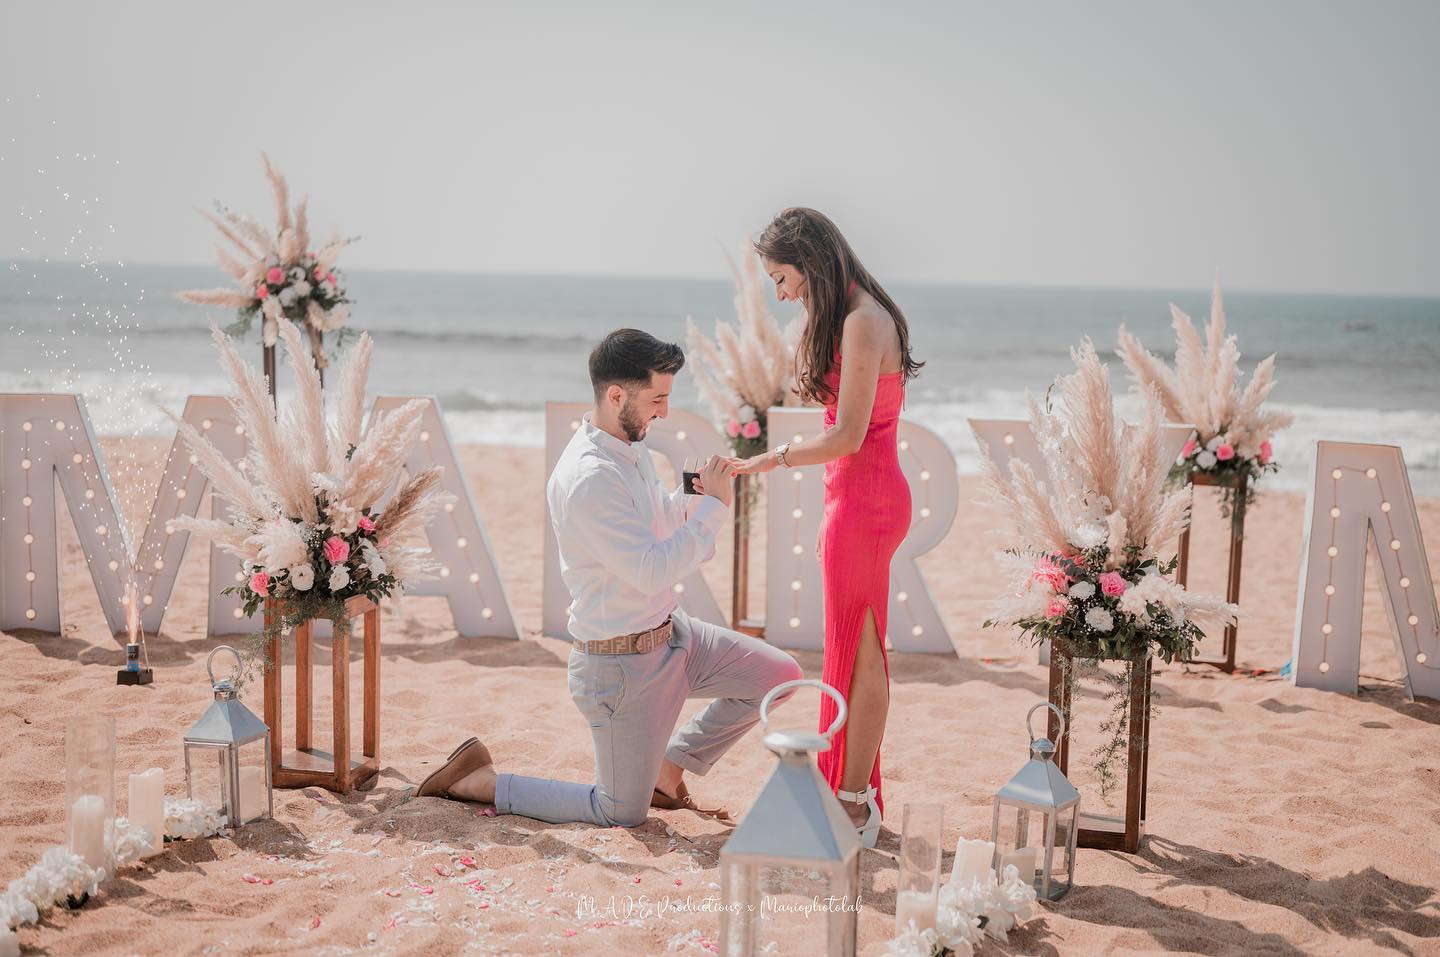 10 Exceptionally Romantic Places To Propose In India